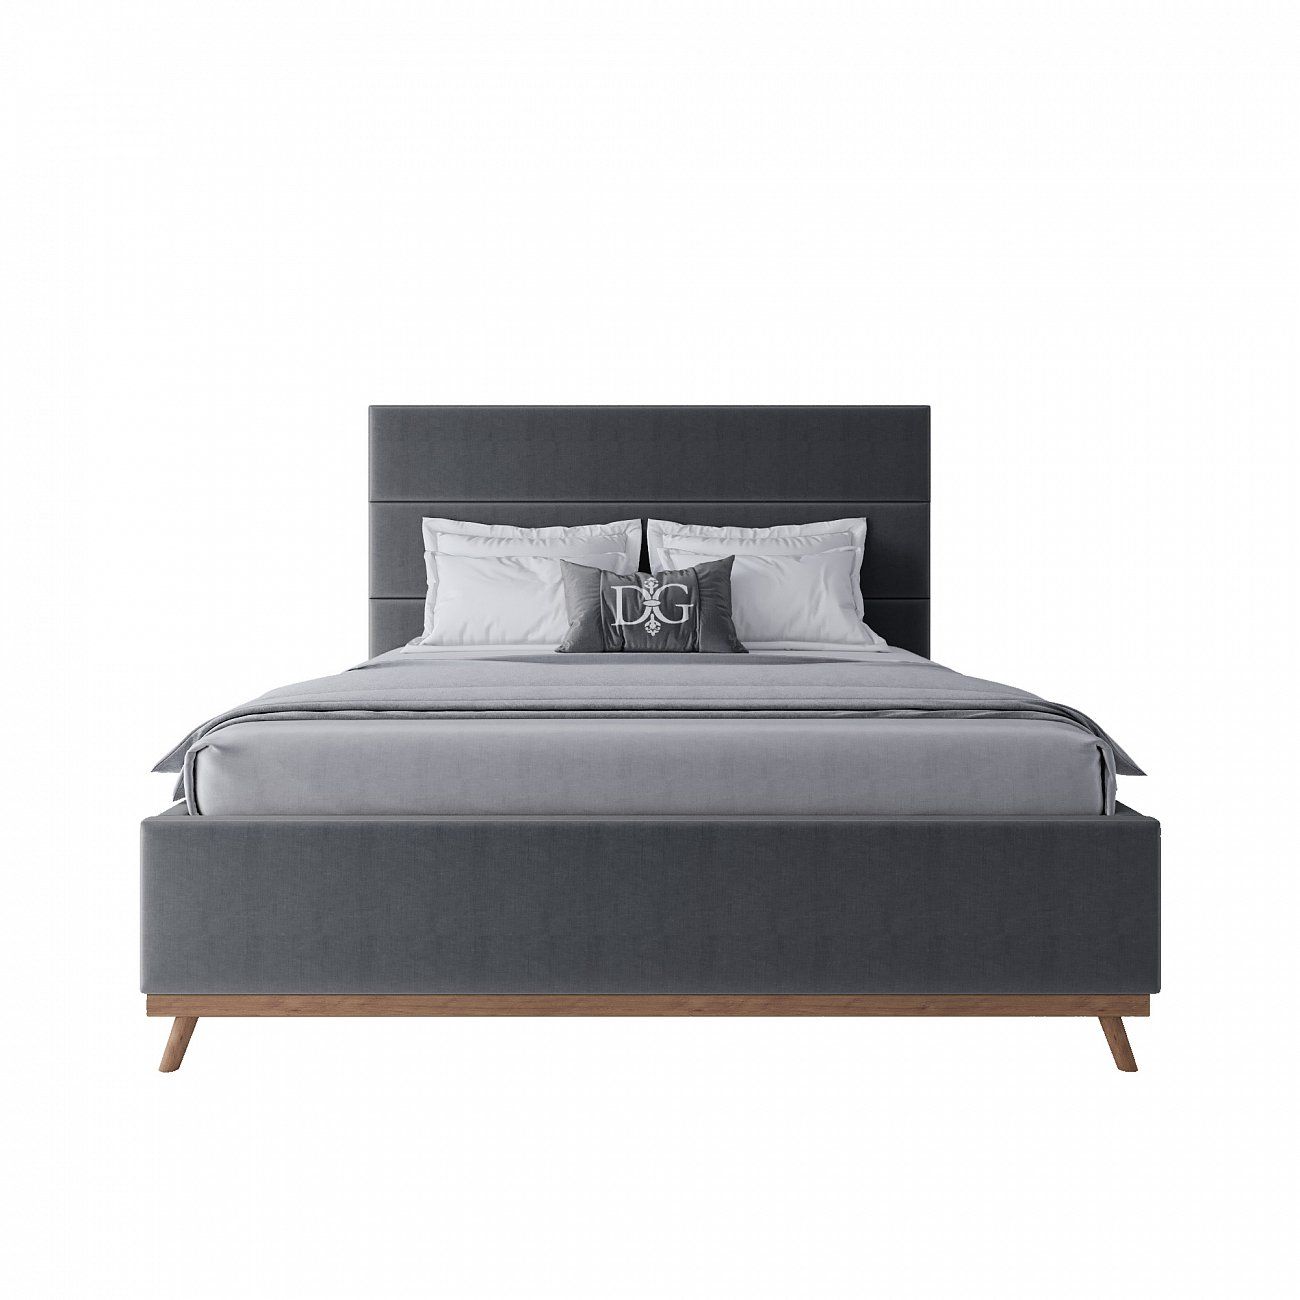 Double bed 160x200 grey Cooper Charcoal